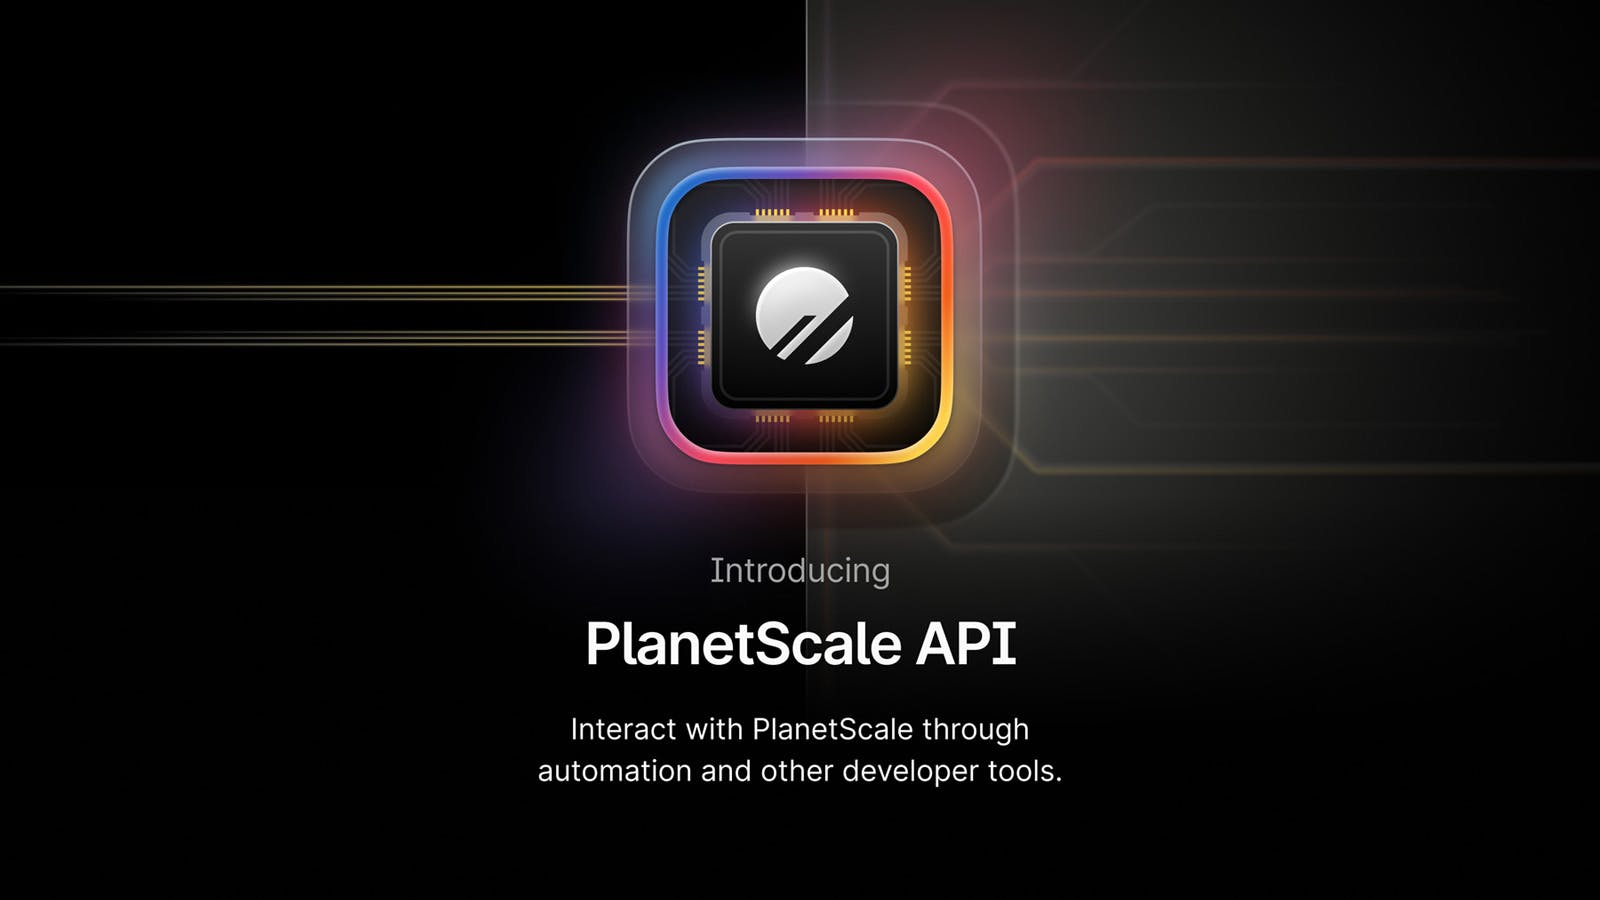 PlanetScale API and OAuth applications